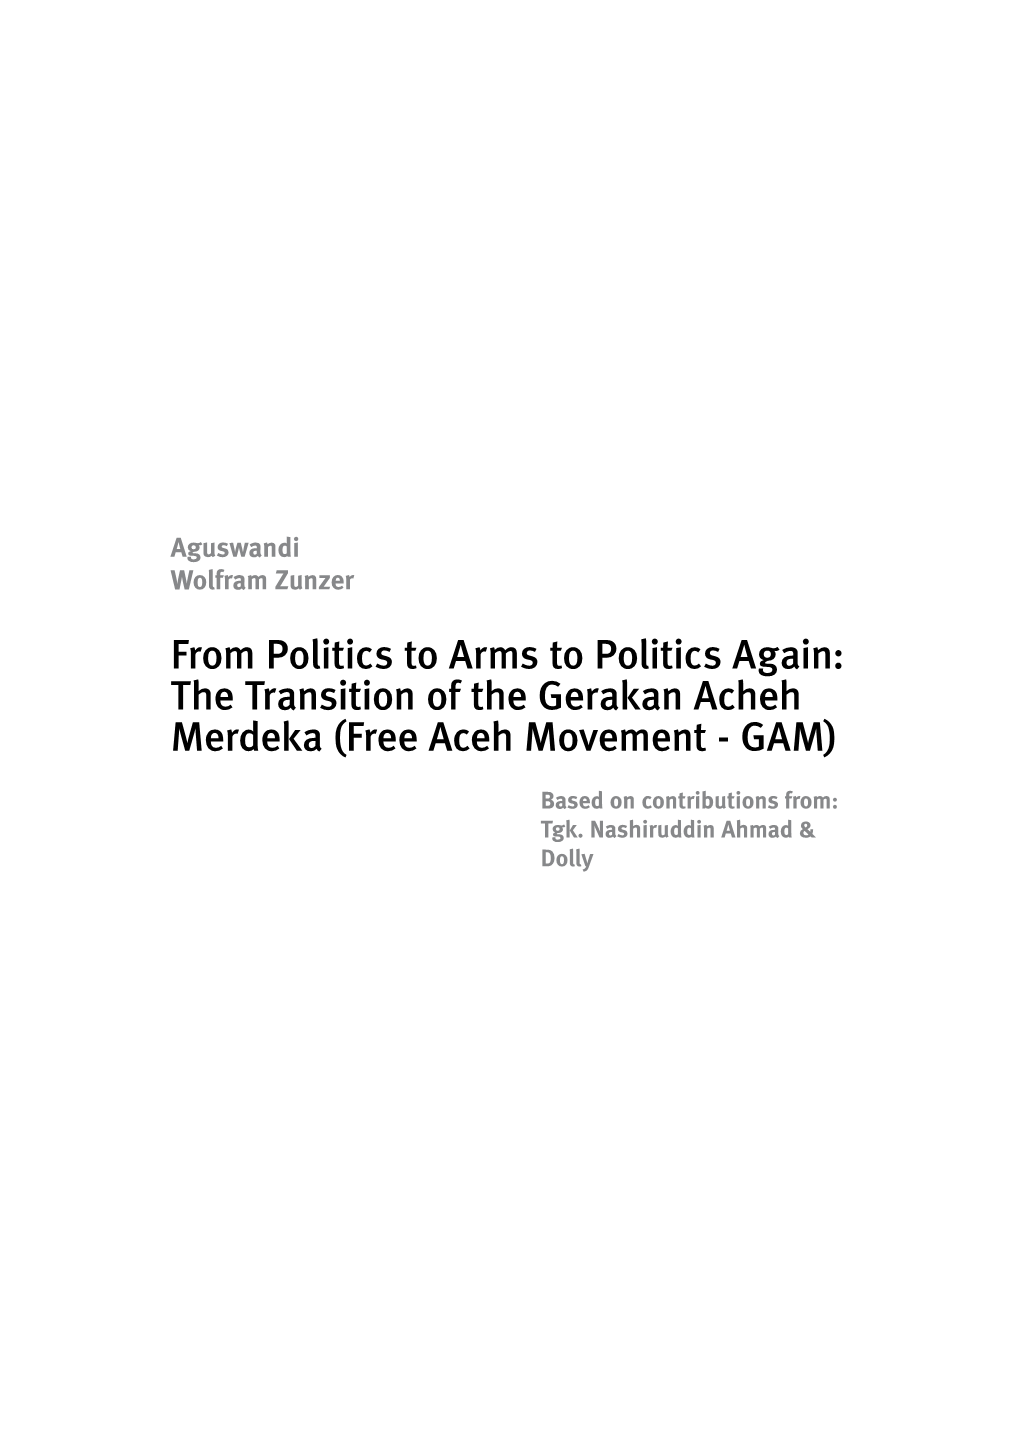 From Politics to Arms to Politics Again: the Transition of the Gerakan Acheh Merdeka (Free Aceh Movement - GAM)